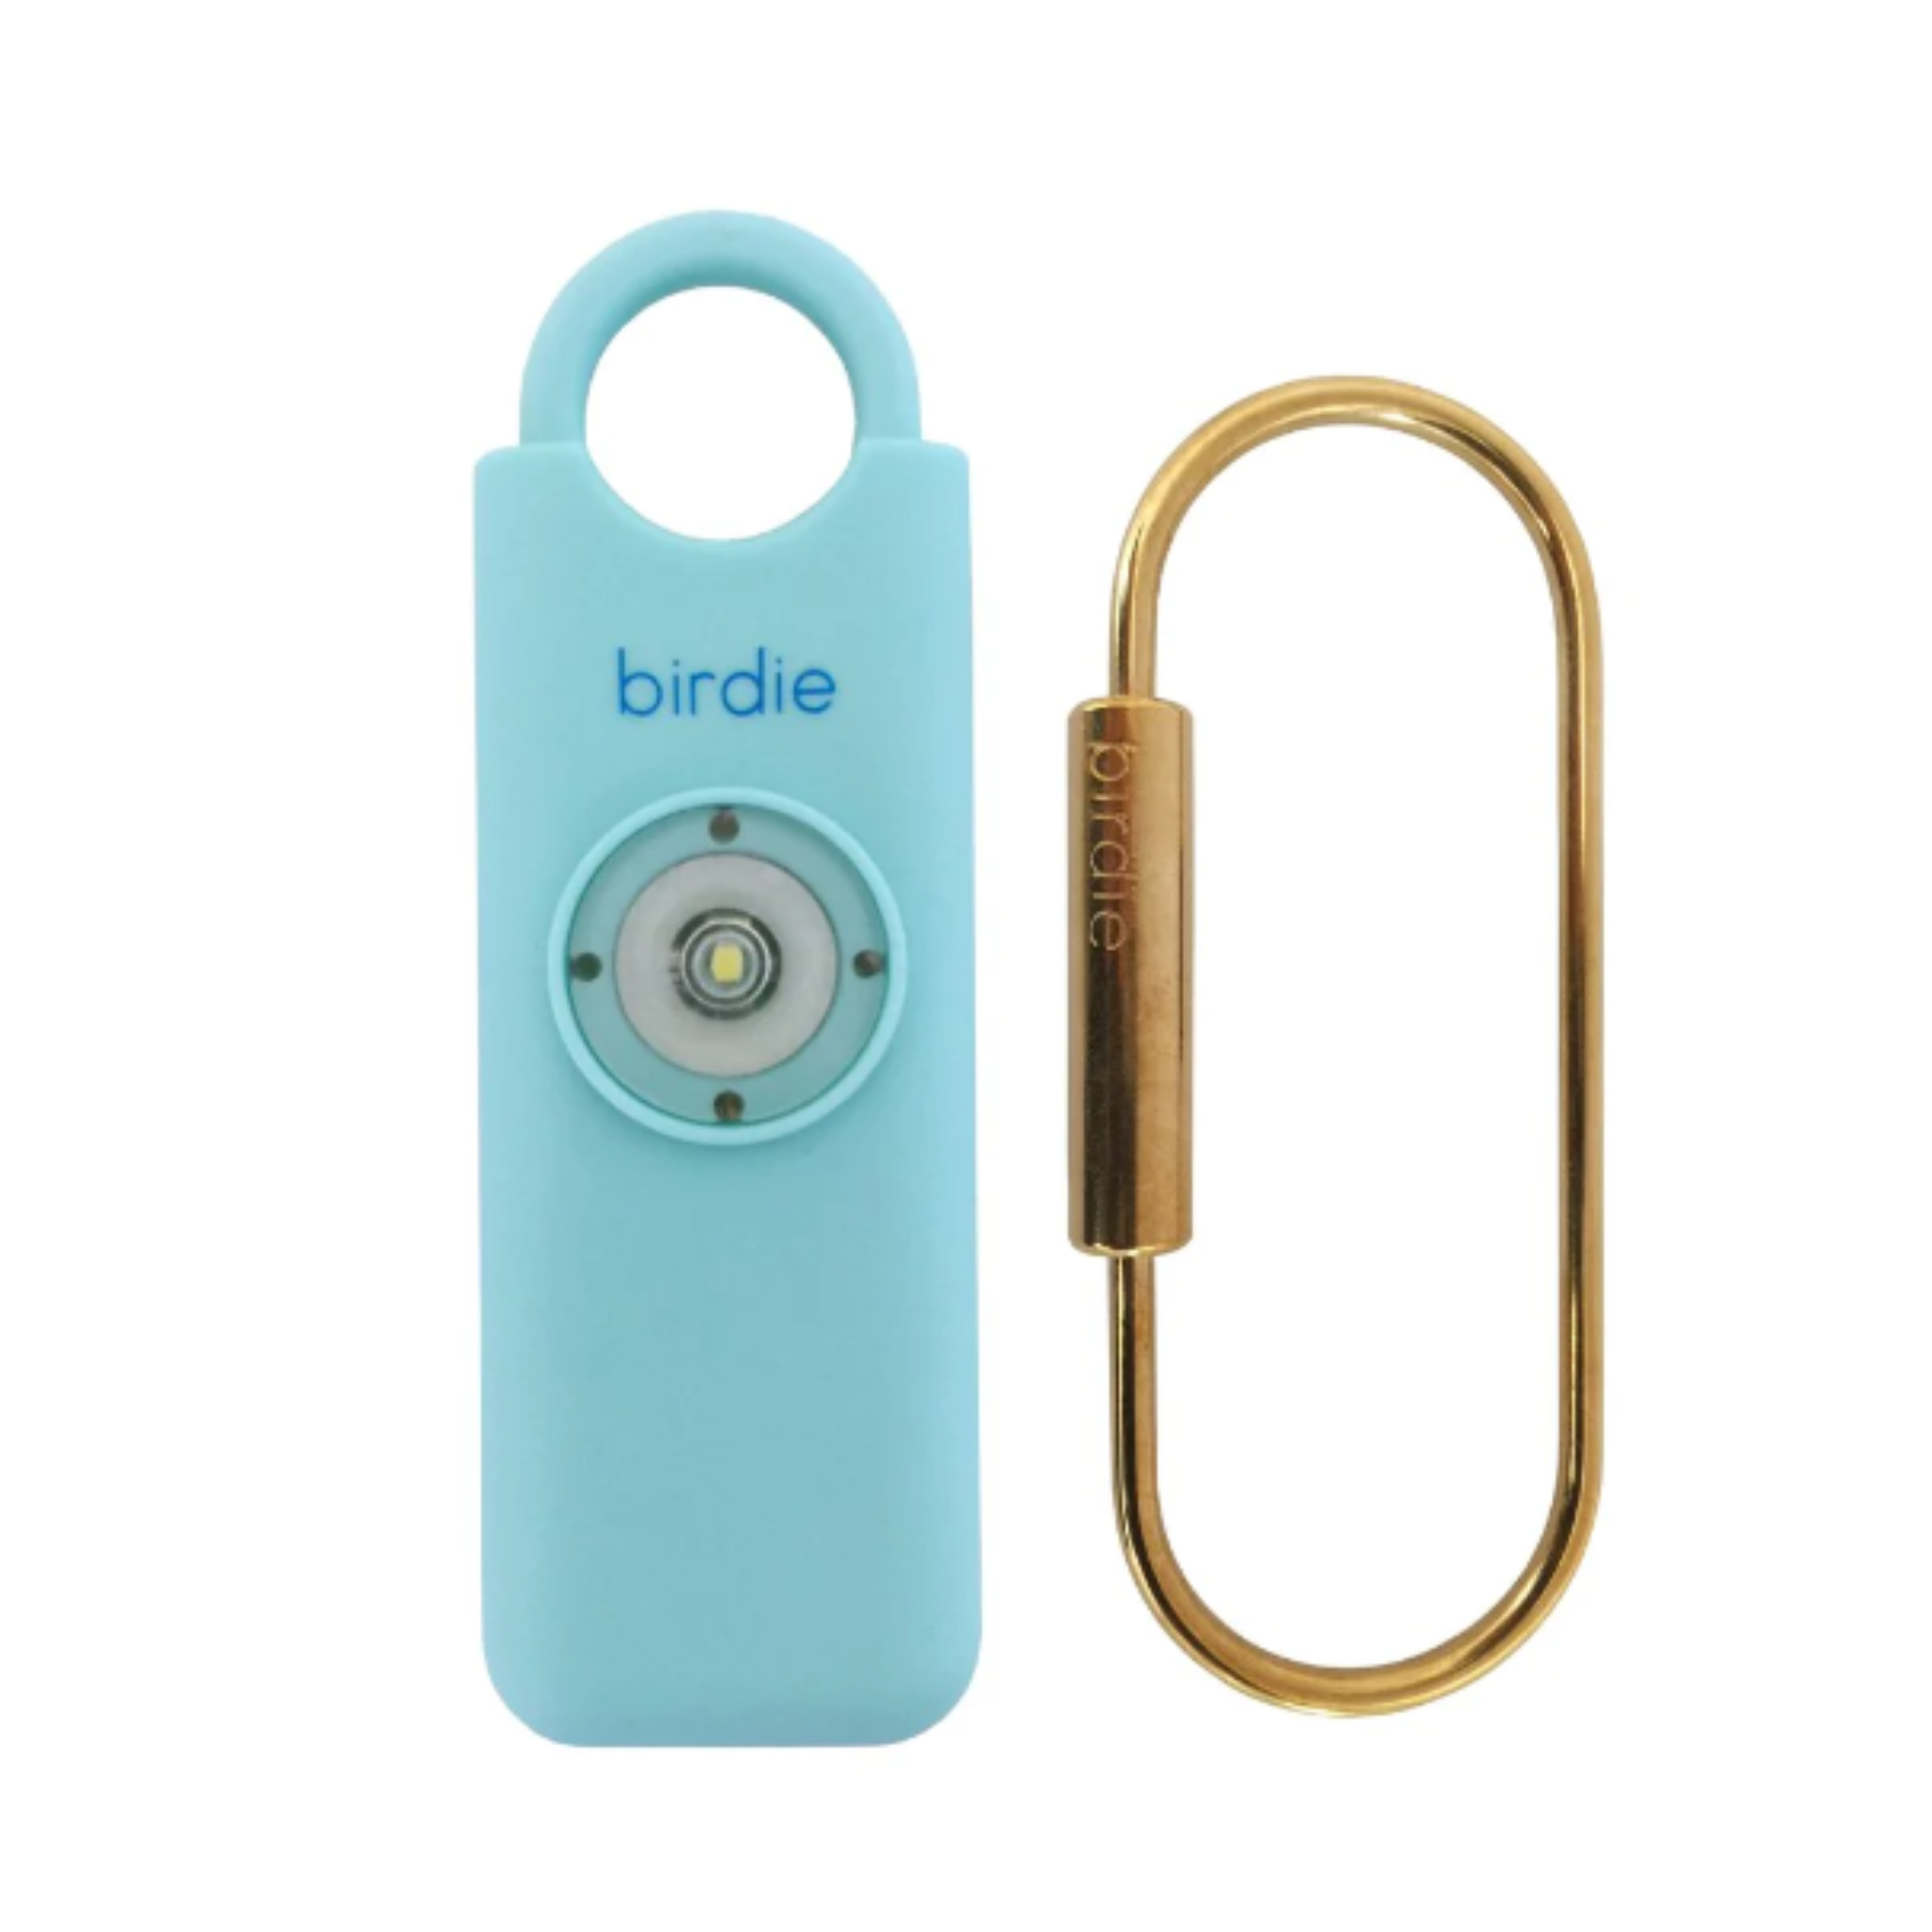 birdie personal safety alarm CHARCOAL